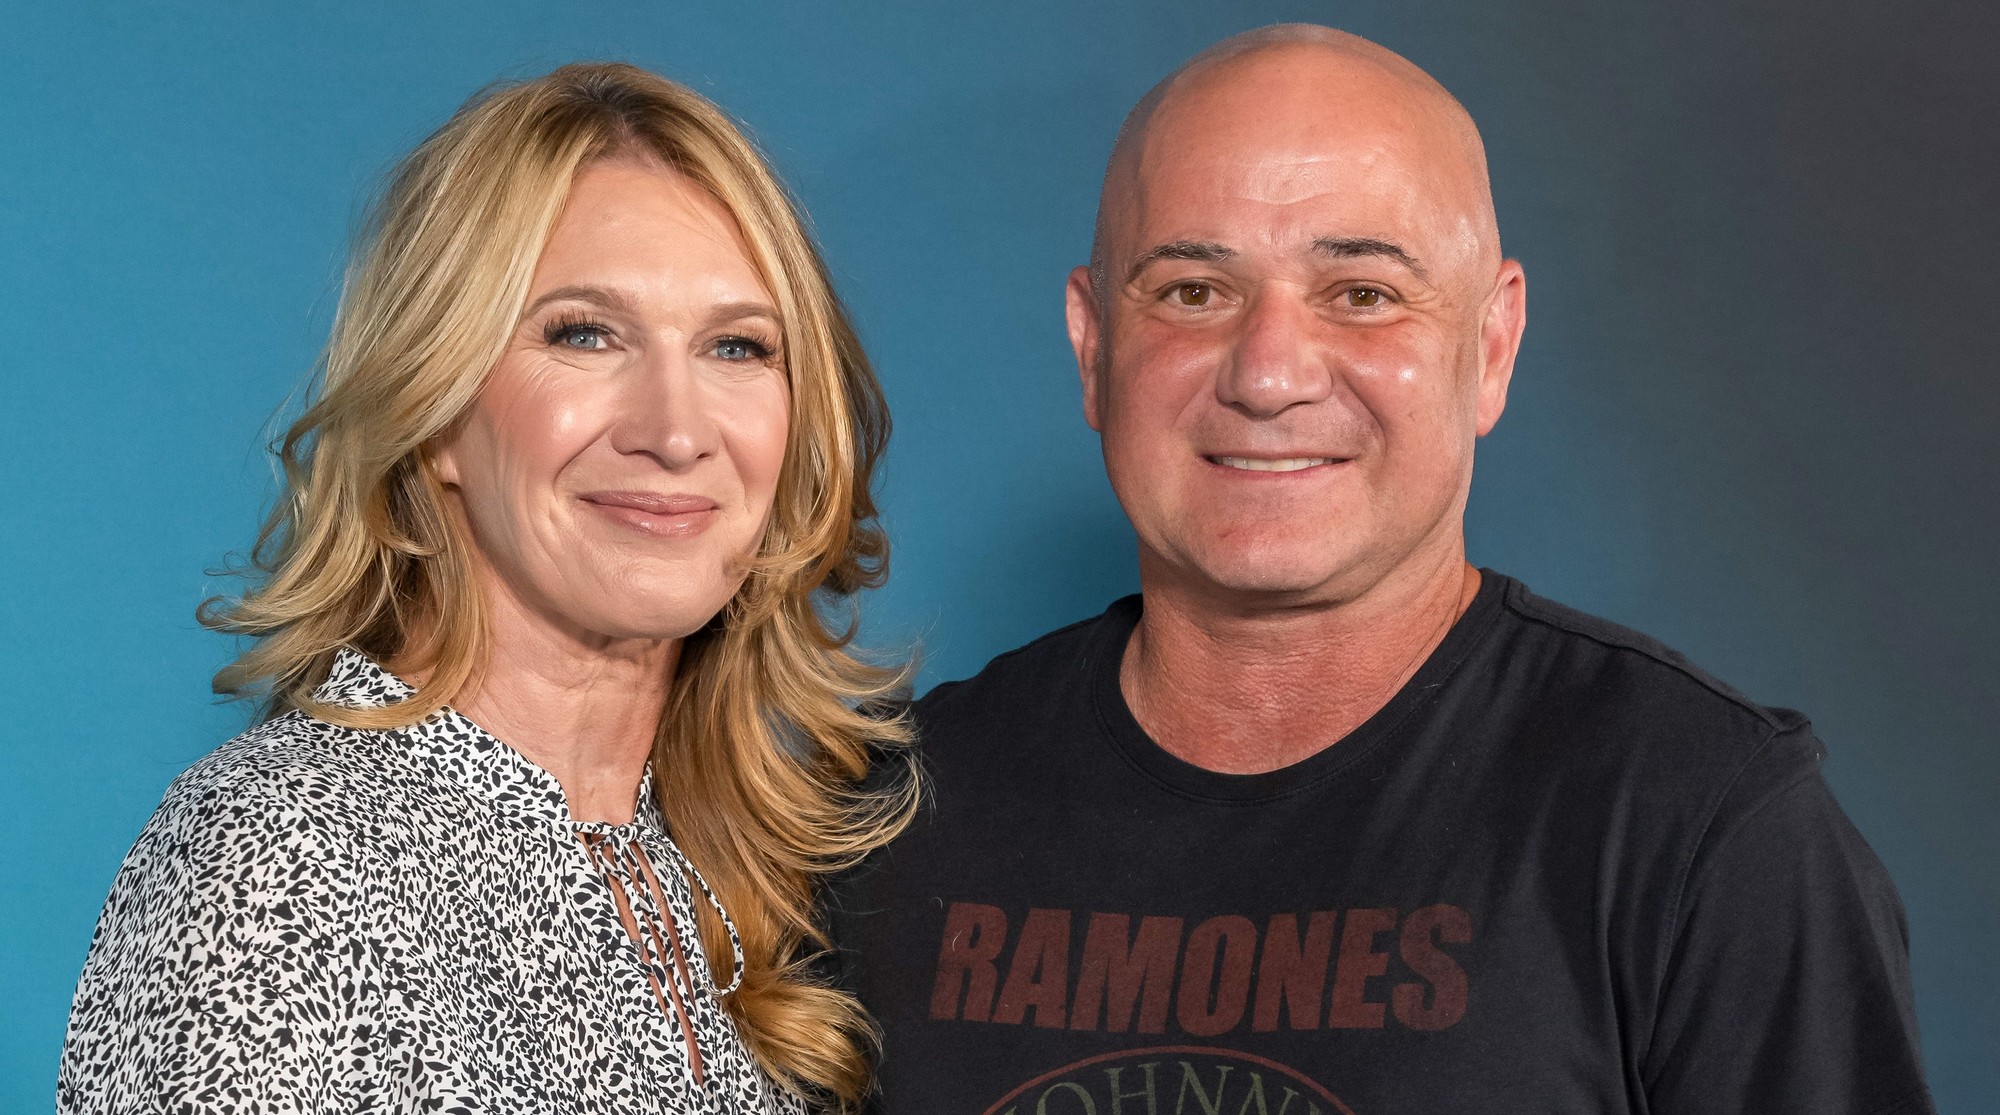 Steffi Graf and Andre Agassi: Are They Still a Couple?